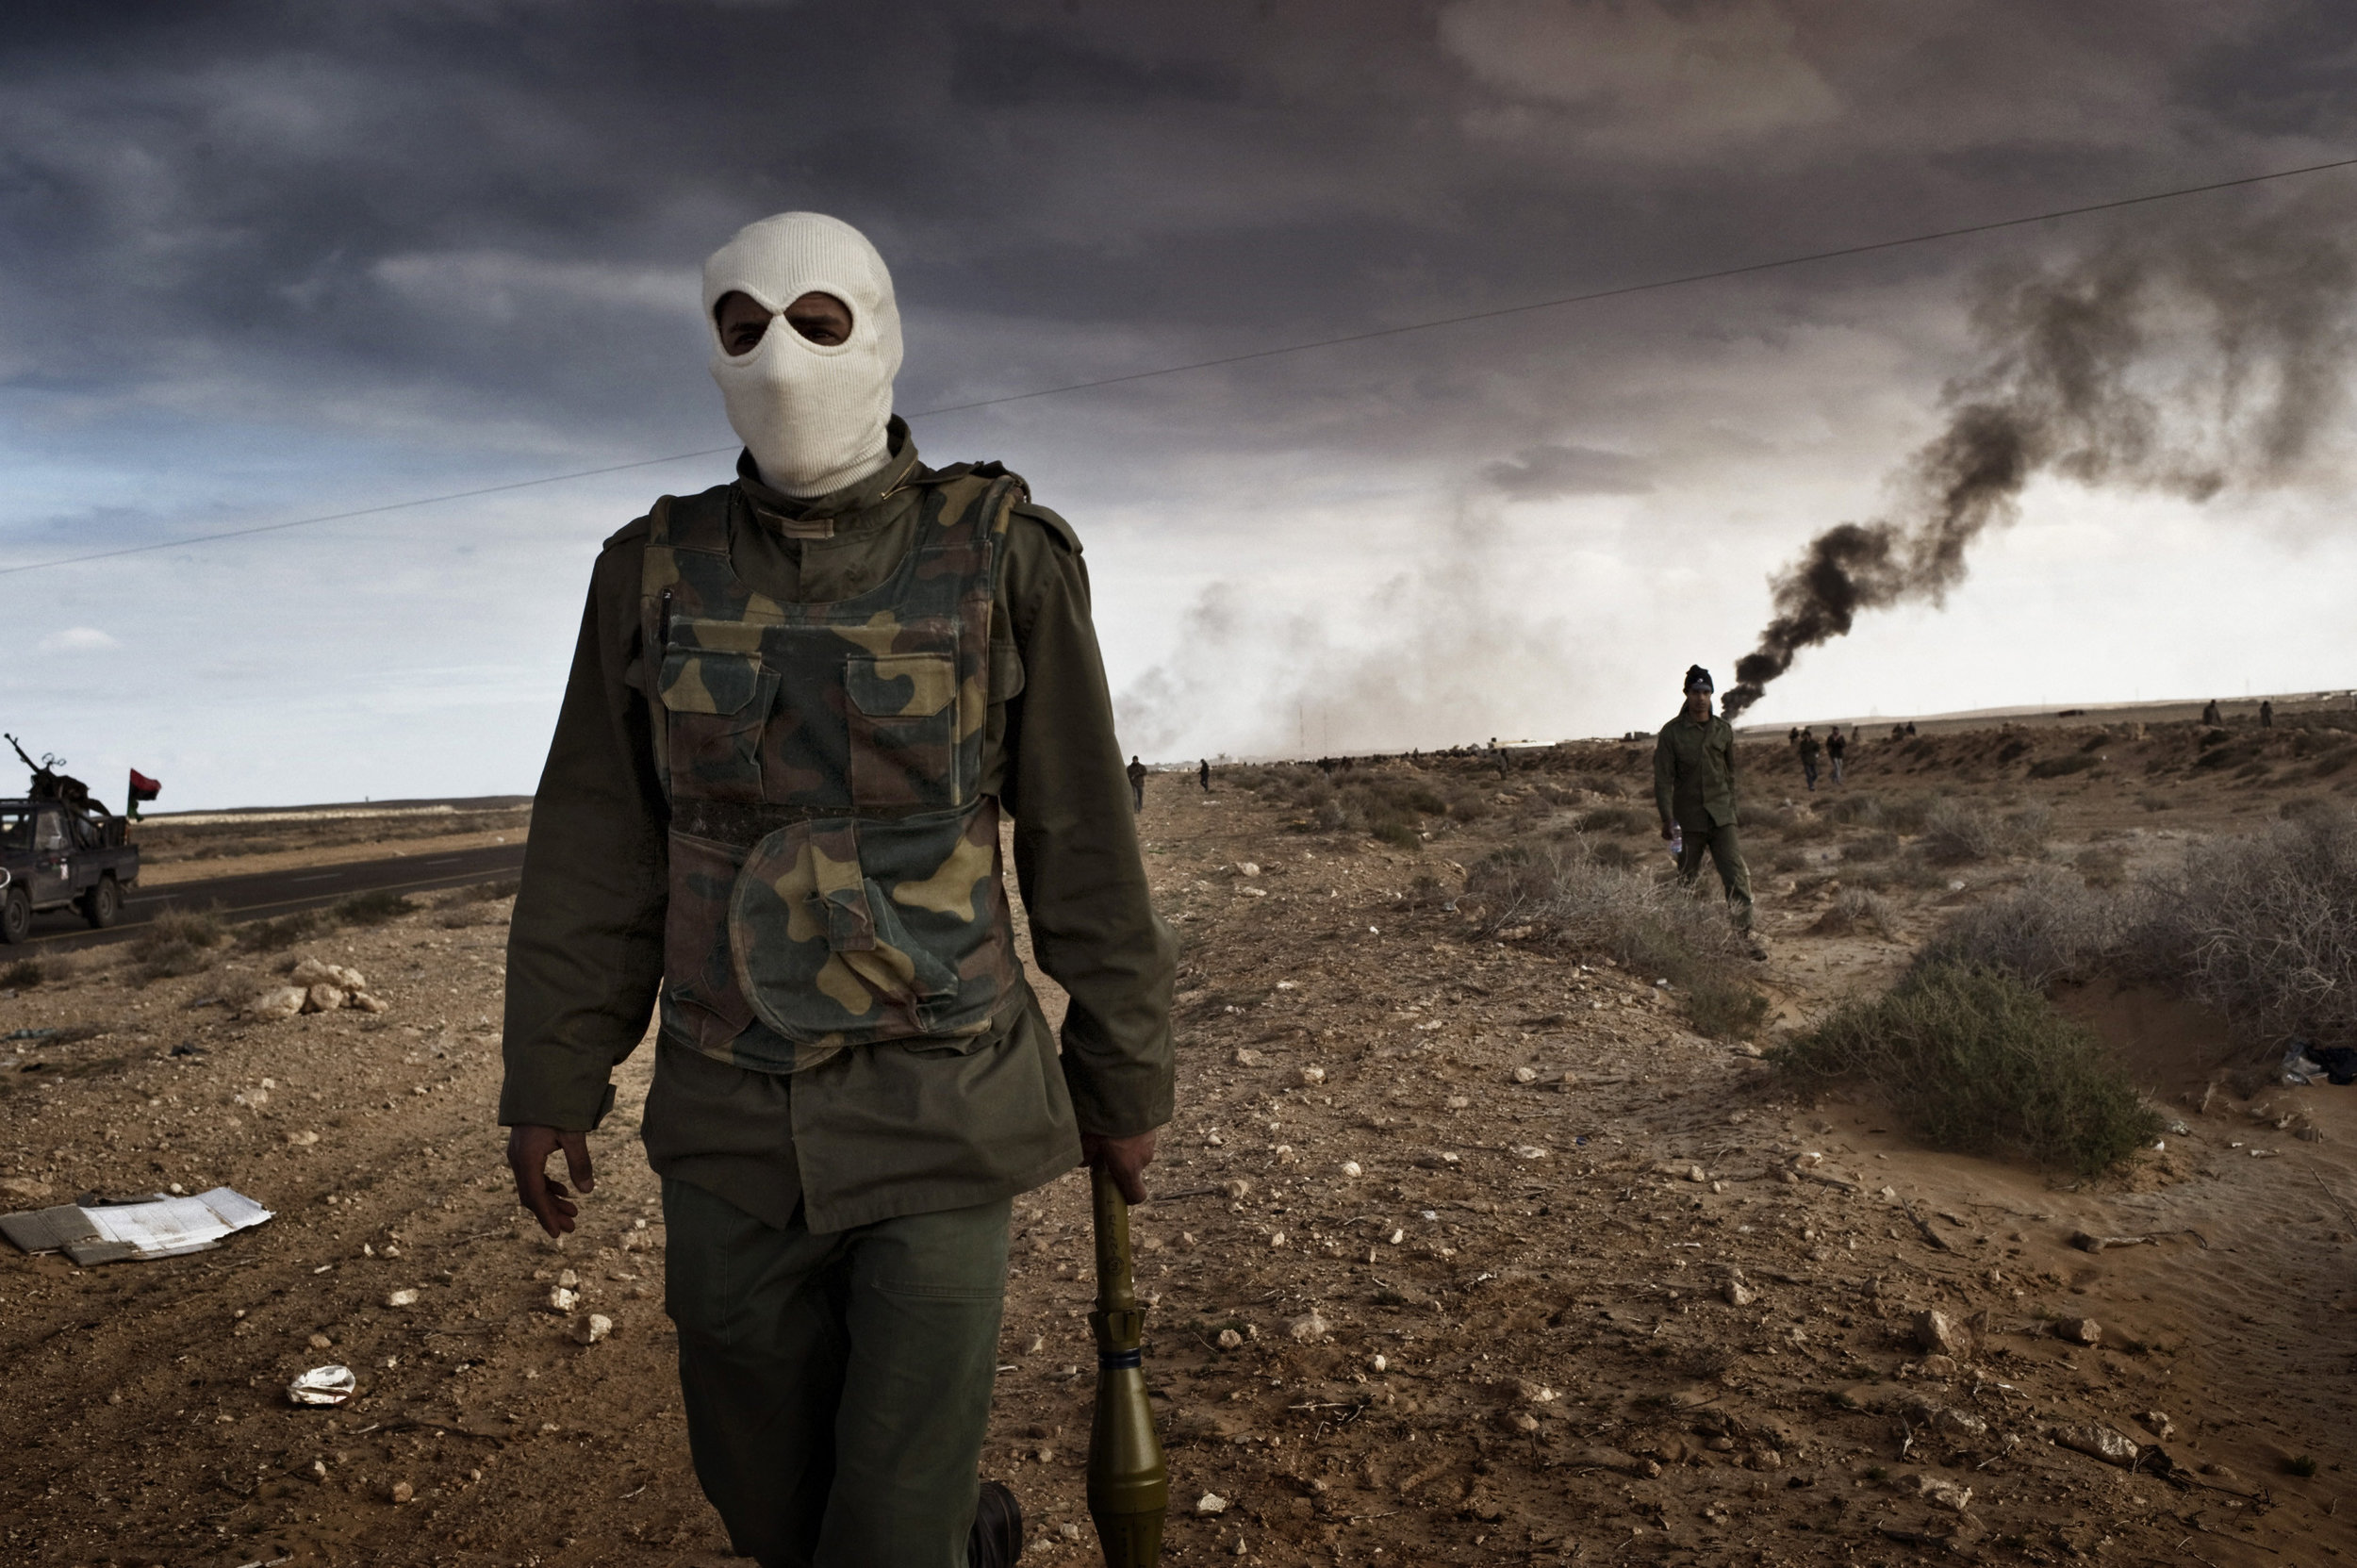   RAS LANUF, LIBYA - MARCH 09: Libyan rebels advance during a battle with government troops as an oil facility burns
 